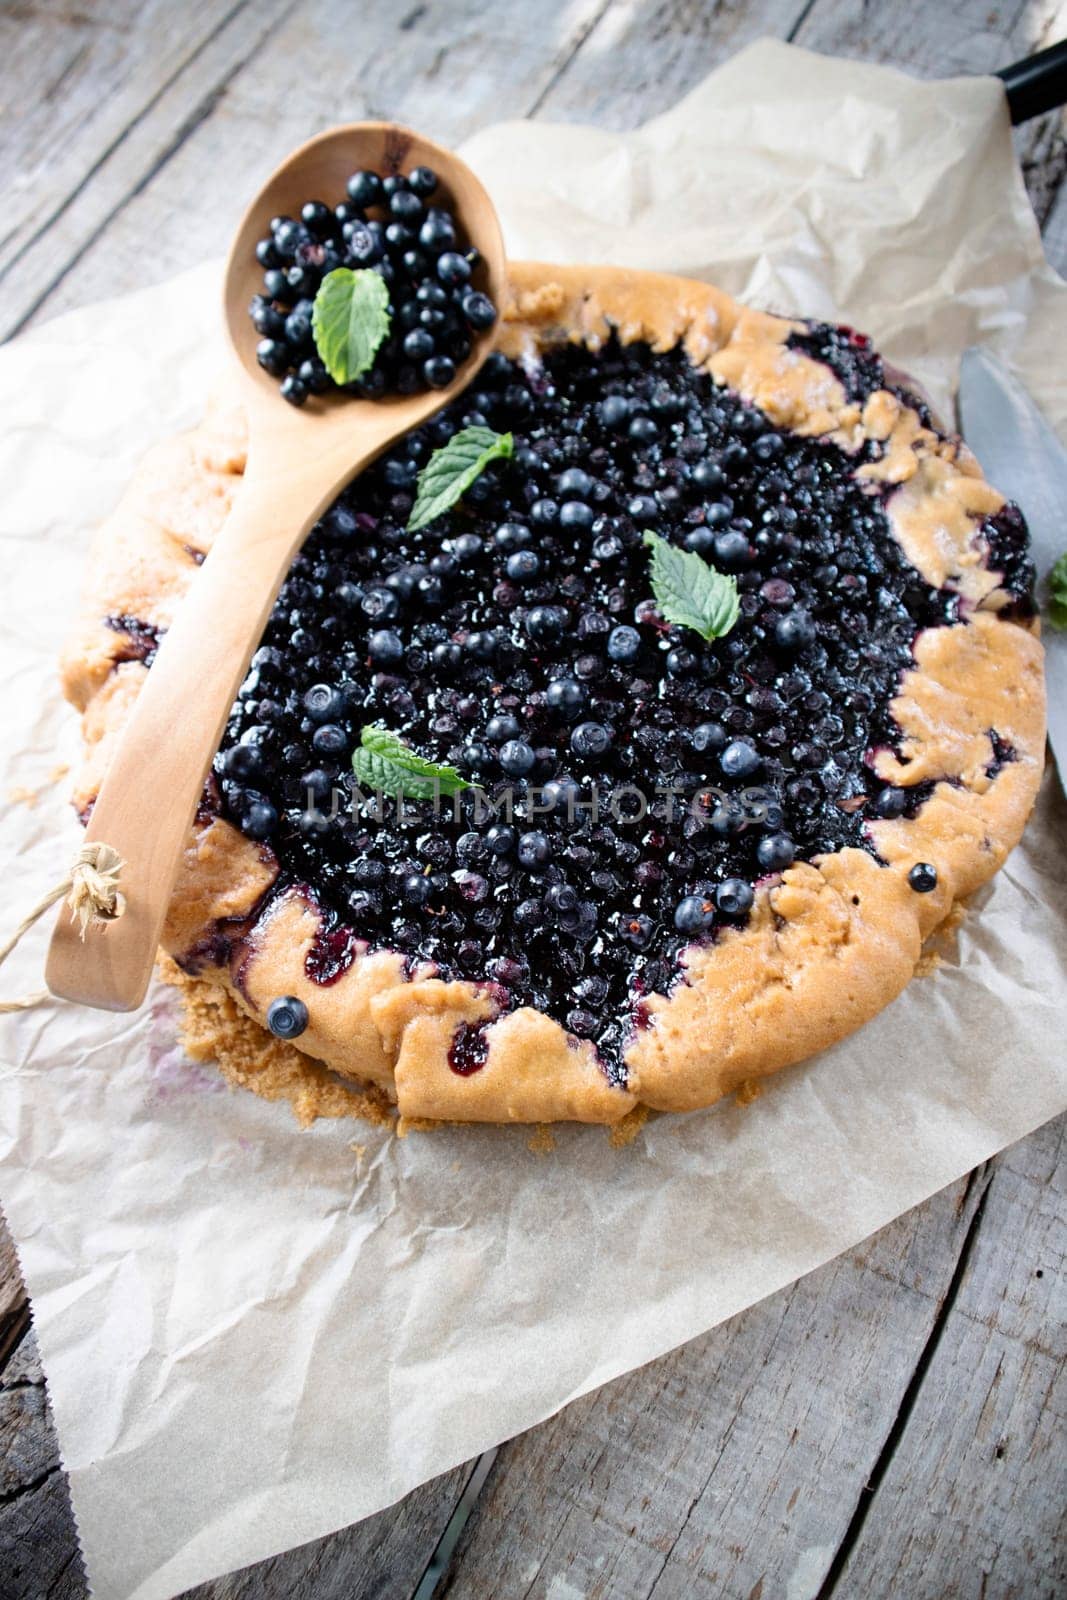 Photographic documentation of a rustic cake made with wild blueberries 